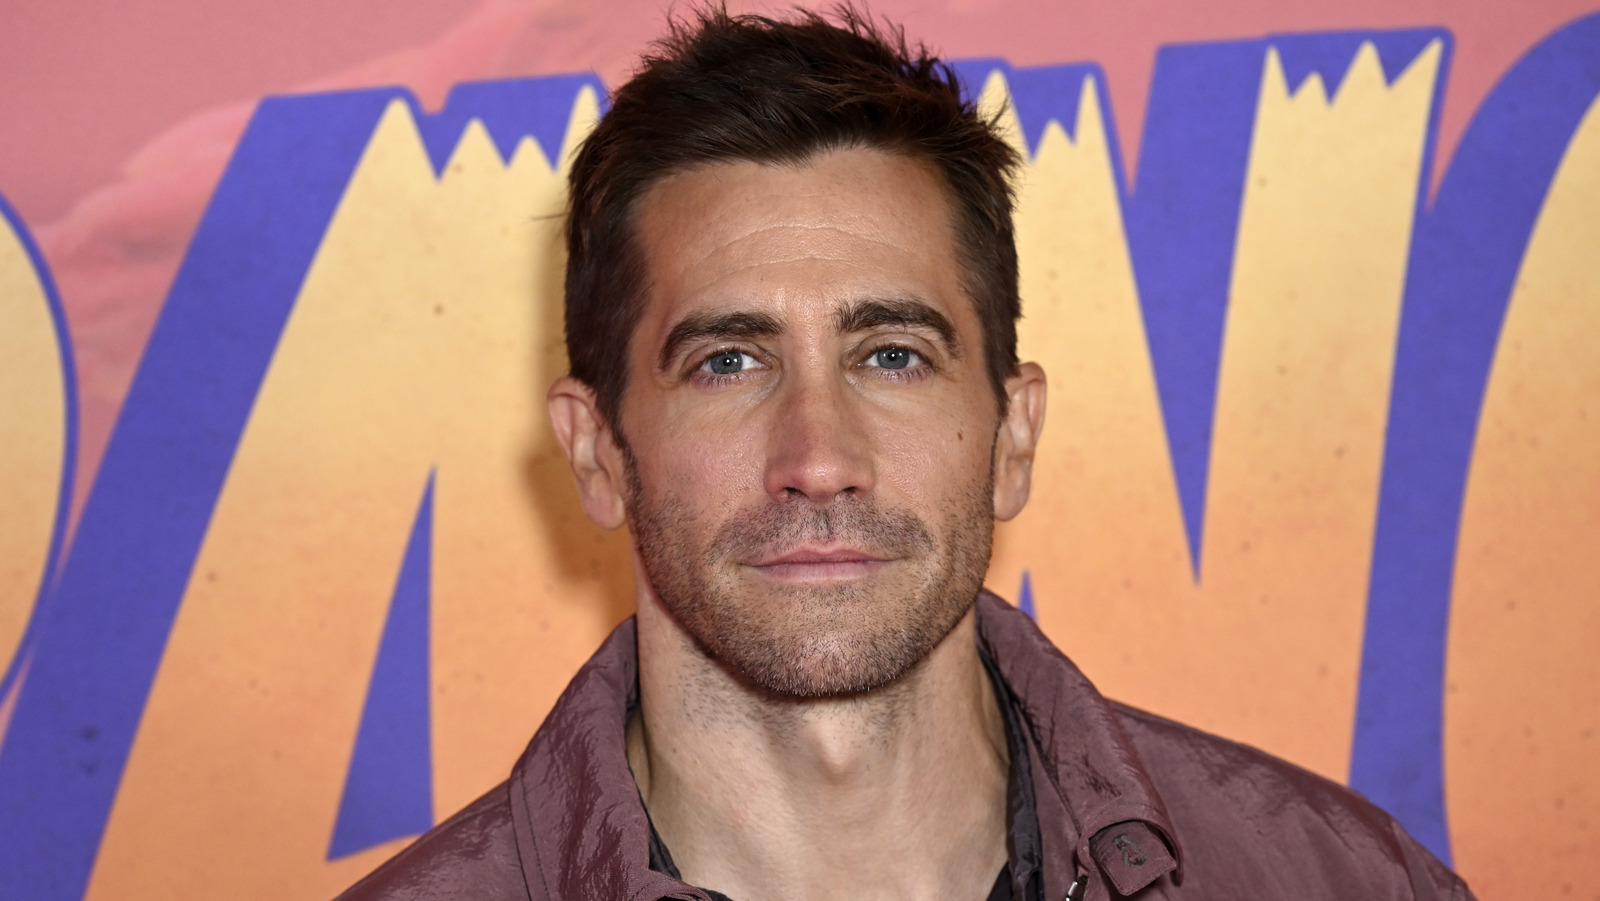 Jake Gyllenhaal's Roadhouse Remake Won't Feature The Patrick Swayze